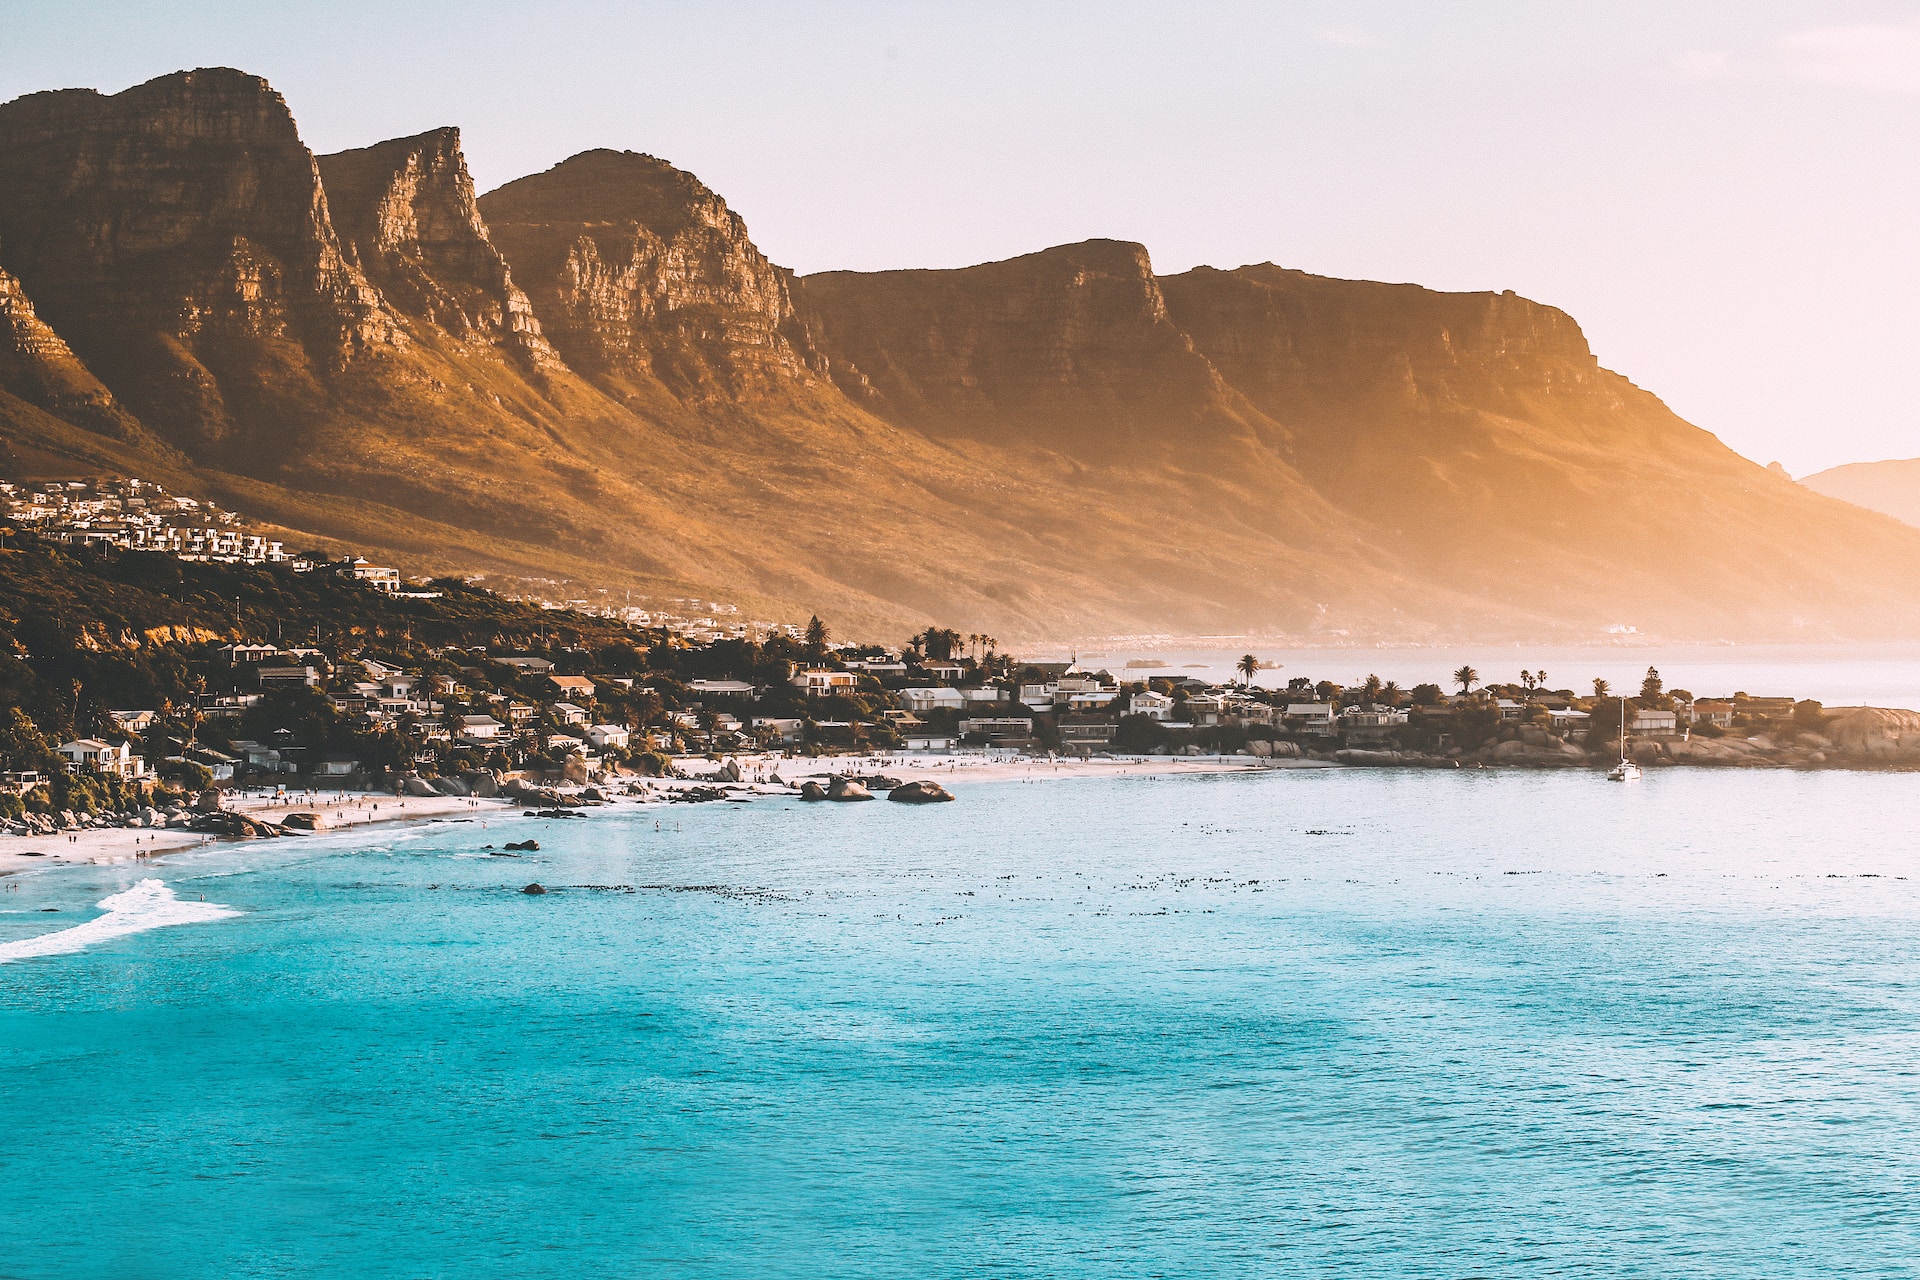 View of Clifton beaches, Cape Town